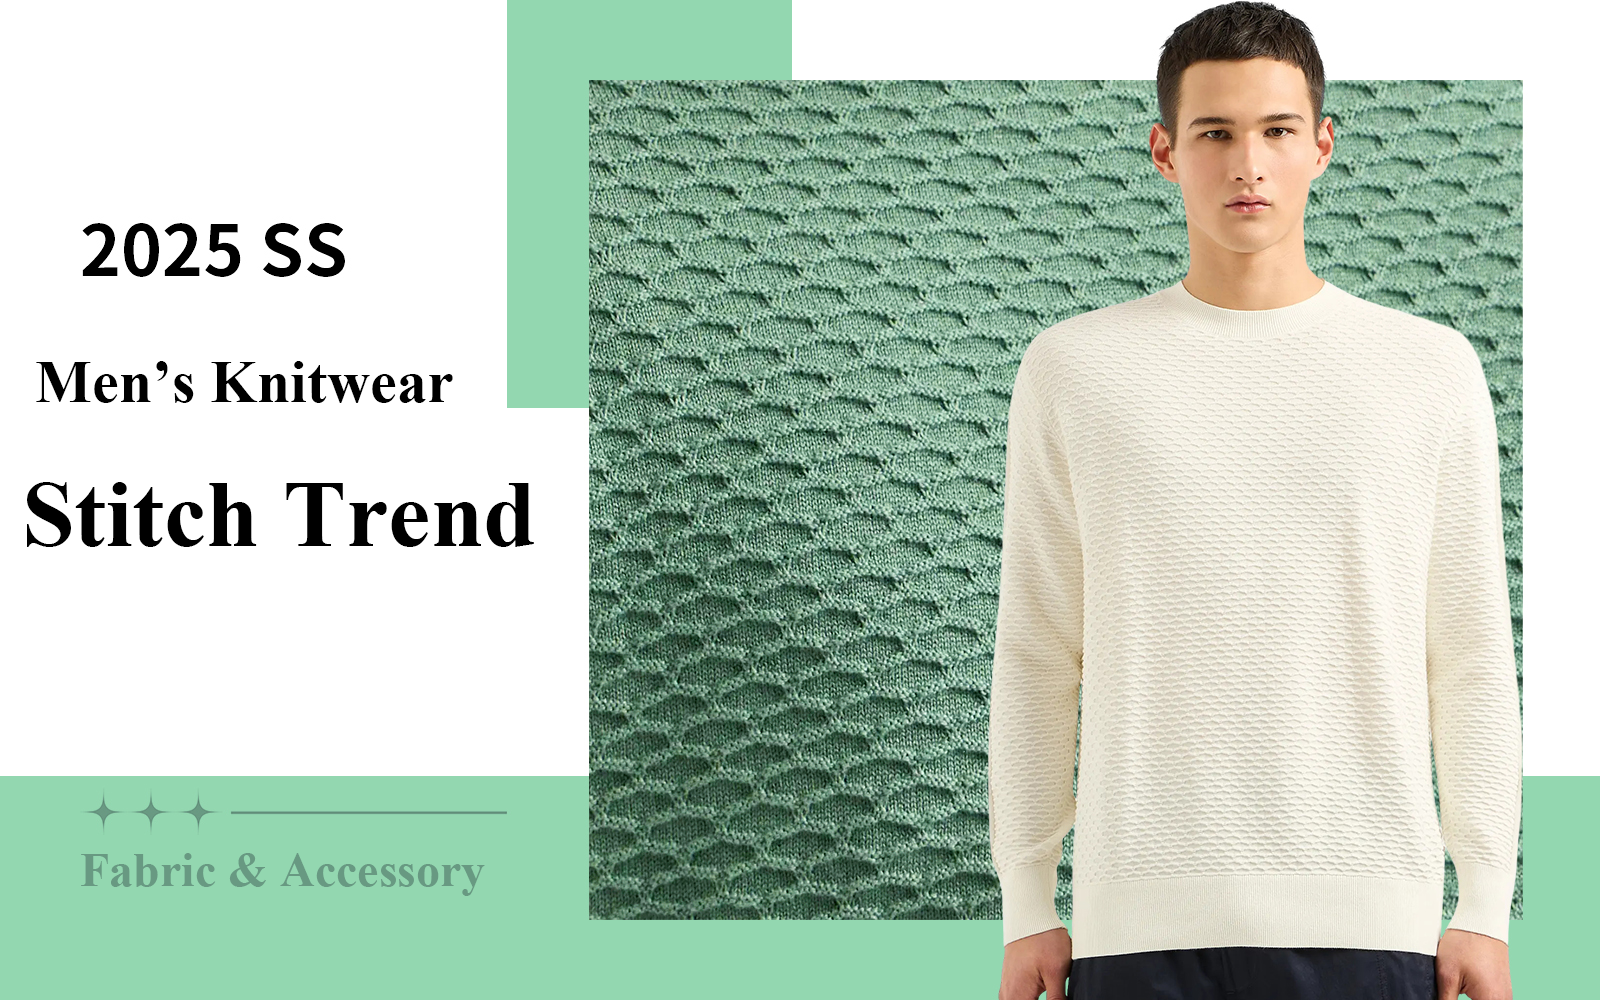 Exquisite Stitching -- S/S 2025 Stitch Trend for Men's Knitwear